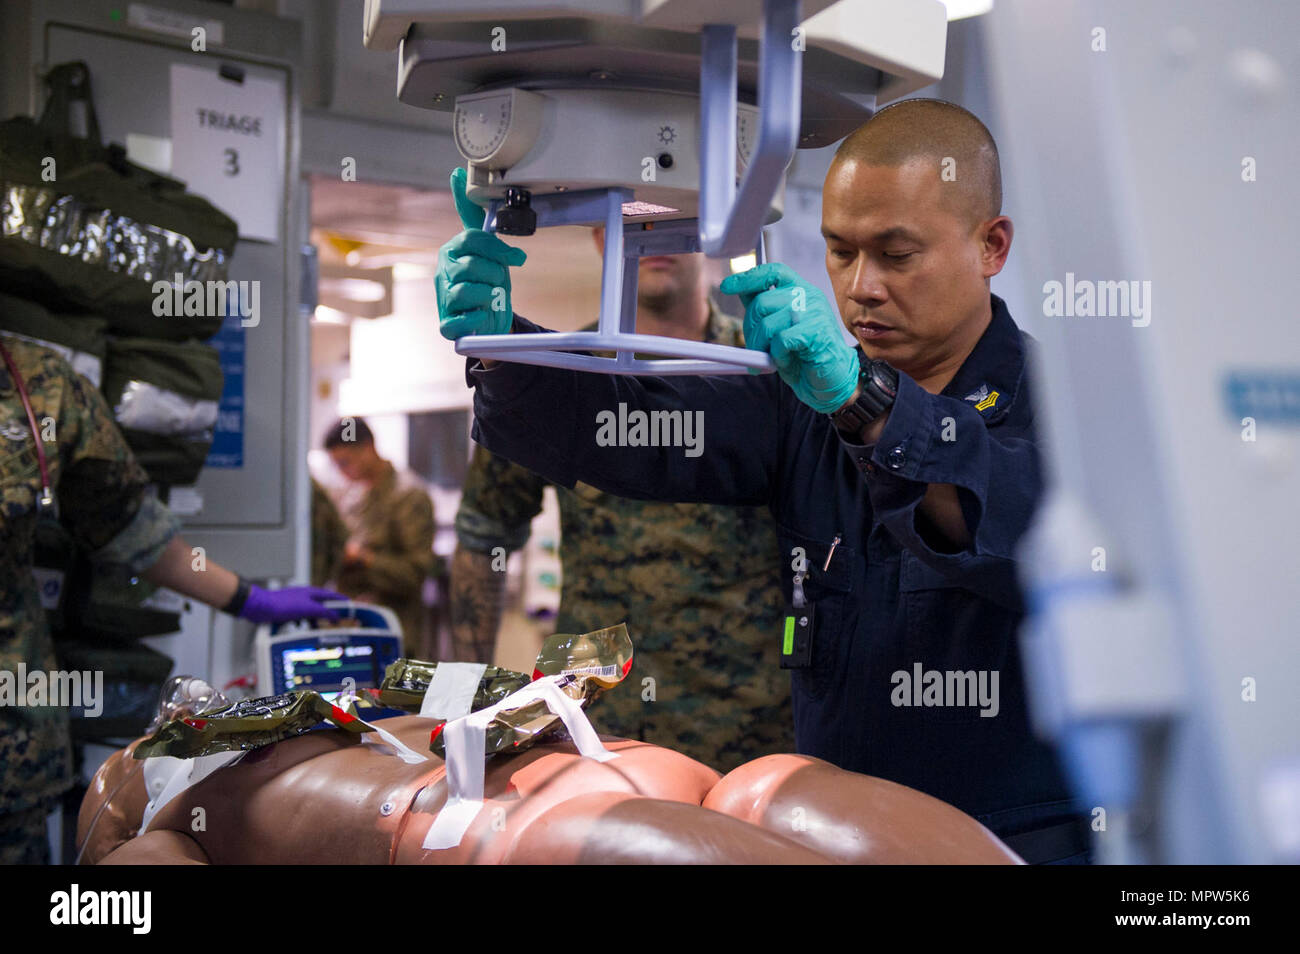 PACIFIC OCEAN (April 11, 2017) Hospital Corpsman 1st Class Loreto Cruz, a native of the Philippines, assigned to the medical team aboard the amphibious assault ship USS America (LHA 6) prepares a patient for an X-ray during a scheduled casualty evacuation drill. America is currently underway with more than 1,000 Sailors and 1,600 Marines conducting Amphibious Squadron/Marine Expeditionary Unit Integration operations in preparation for the ship's maiden deployment later this year. Stock Photo